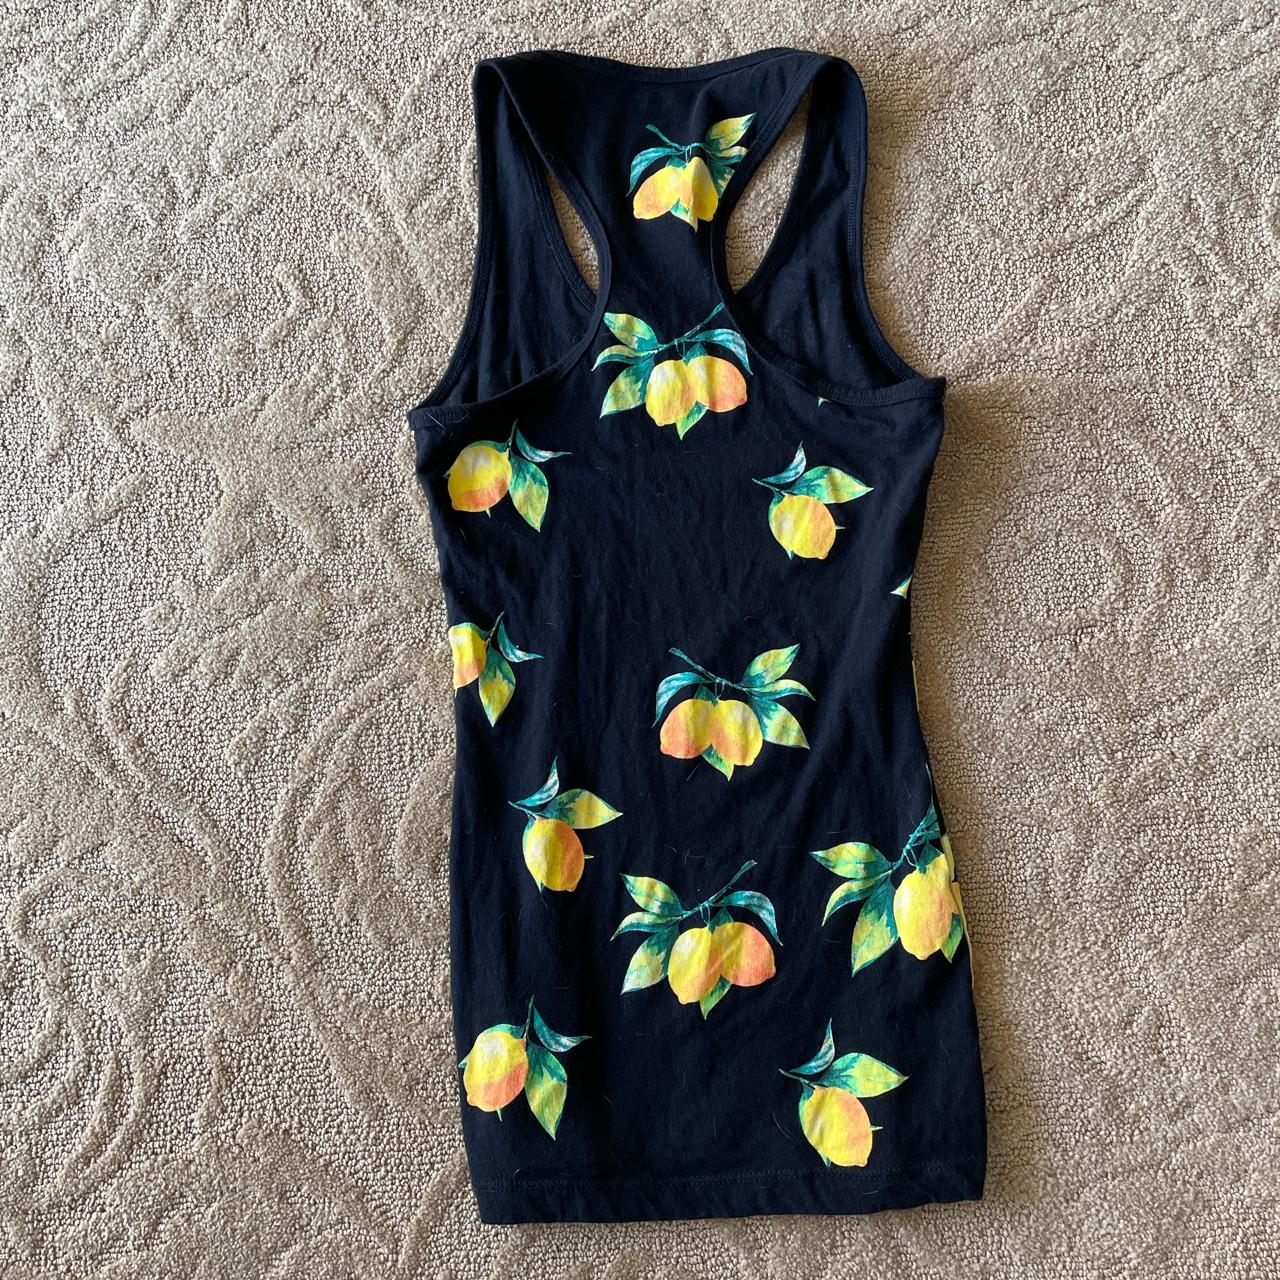 Guess Women's Black and Yellow Vests-tanks-camis (4)